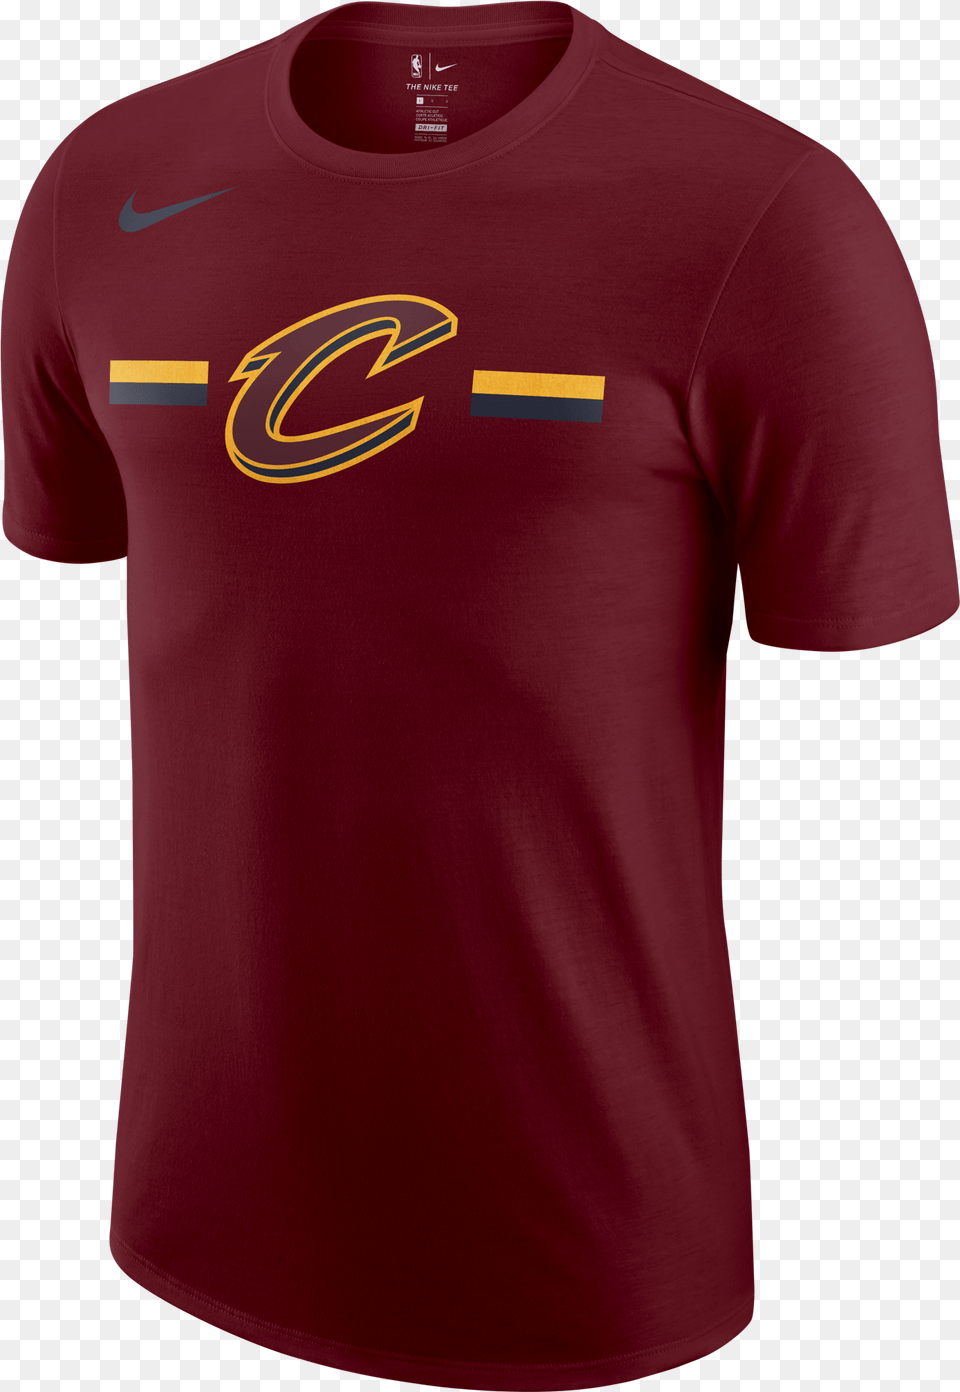 Nike Nba Cleveland Cavaliers Logo Dry Cleveland Cavaliers, Clothing, Shirt, T-shirt, Maroon Png Image